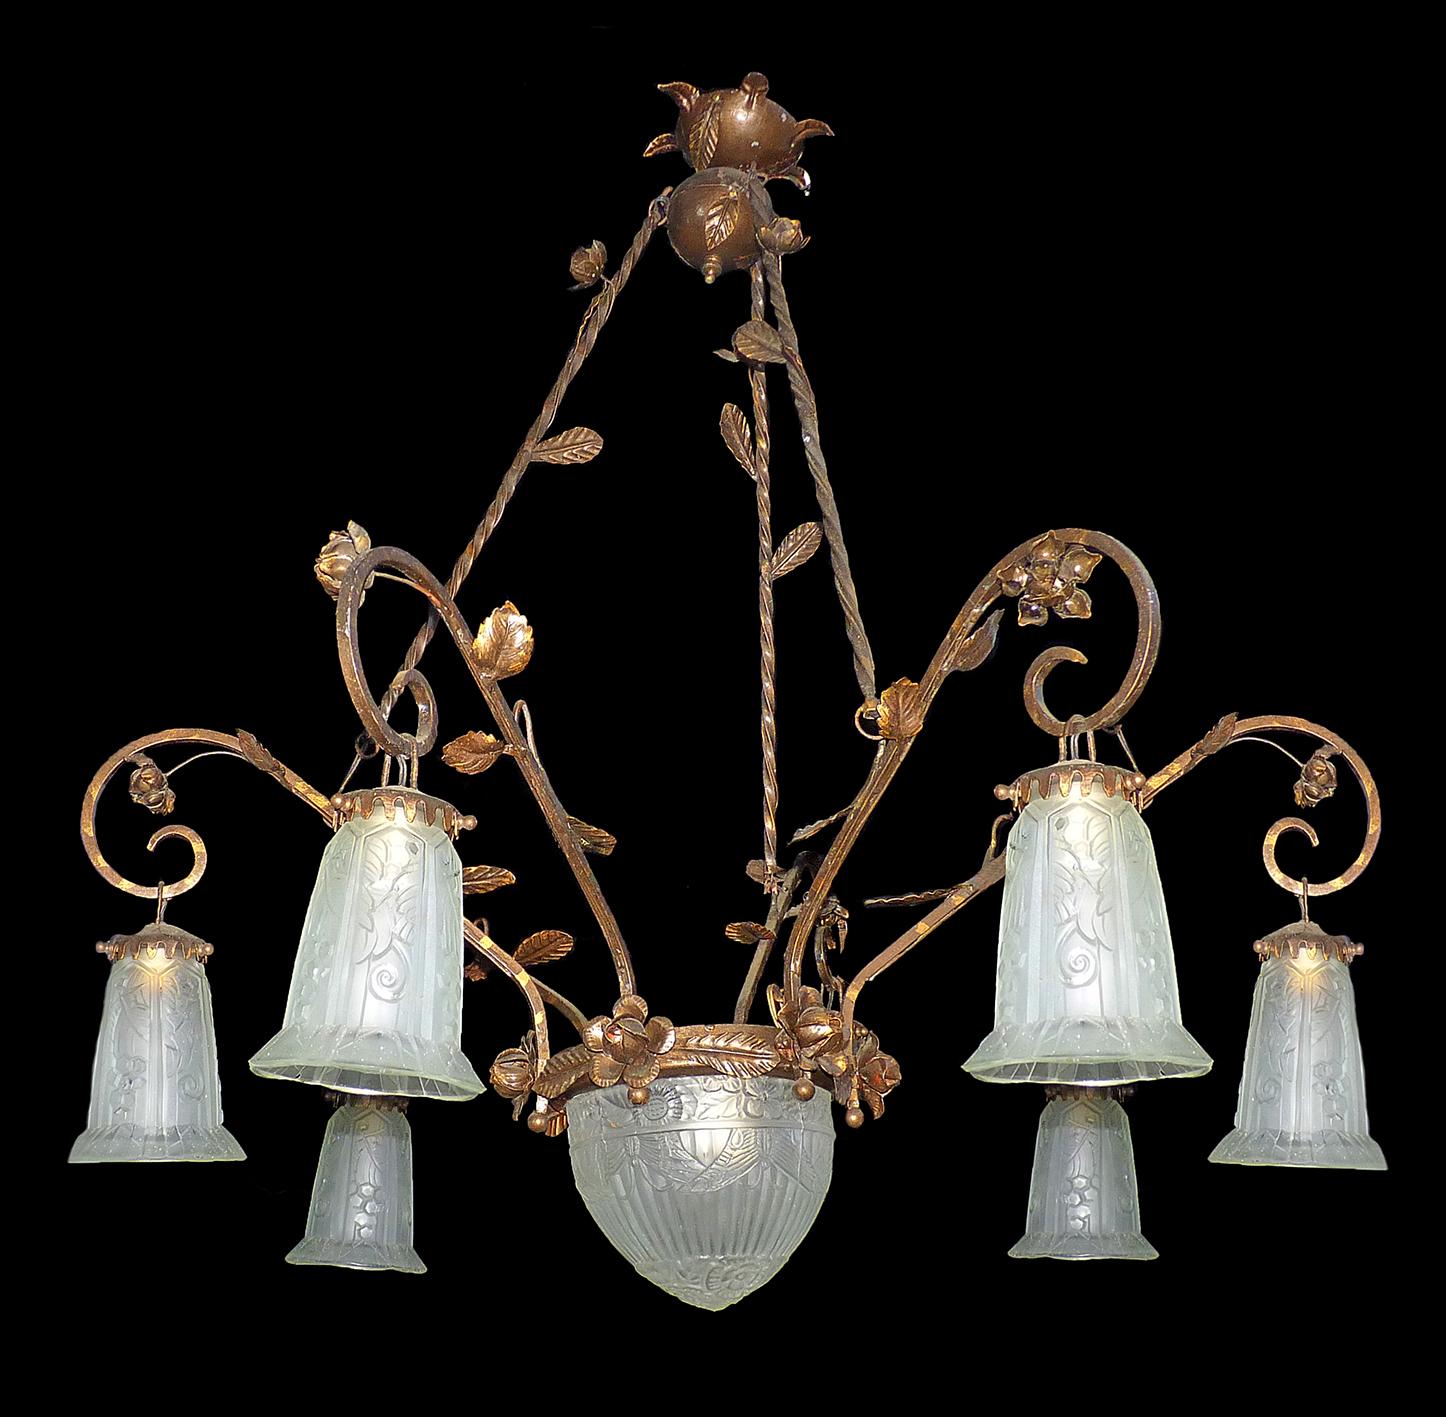 Beautiful French 1930 Art Deco chandelier or pendant. It features a hand forged wrought iron base with stylized leaf and flowers detailing, and floral shaped glass shades.
Measures:
Width 33 in / 84 cm
Height 35.4 in / 90 cm
Weight 20 lb. (9 kg)
7